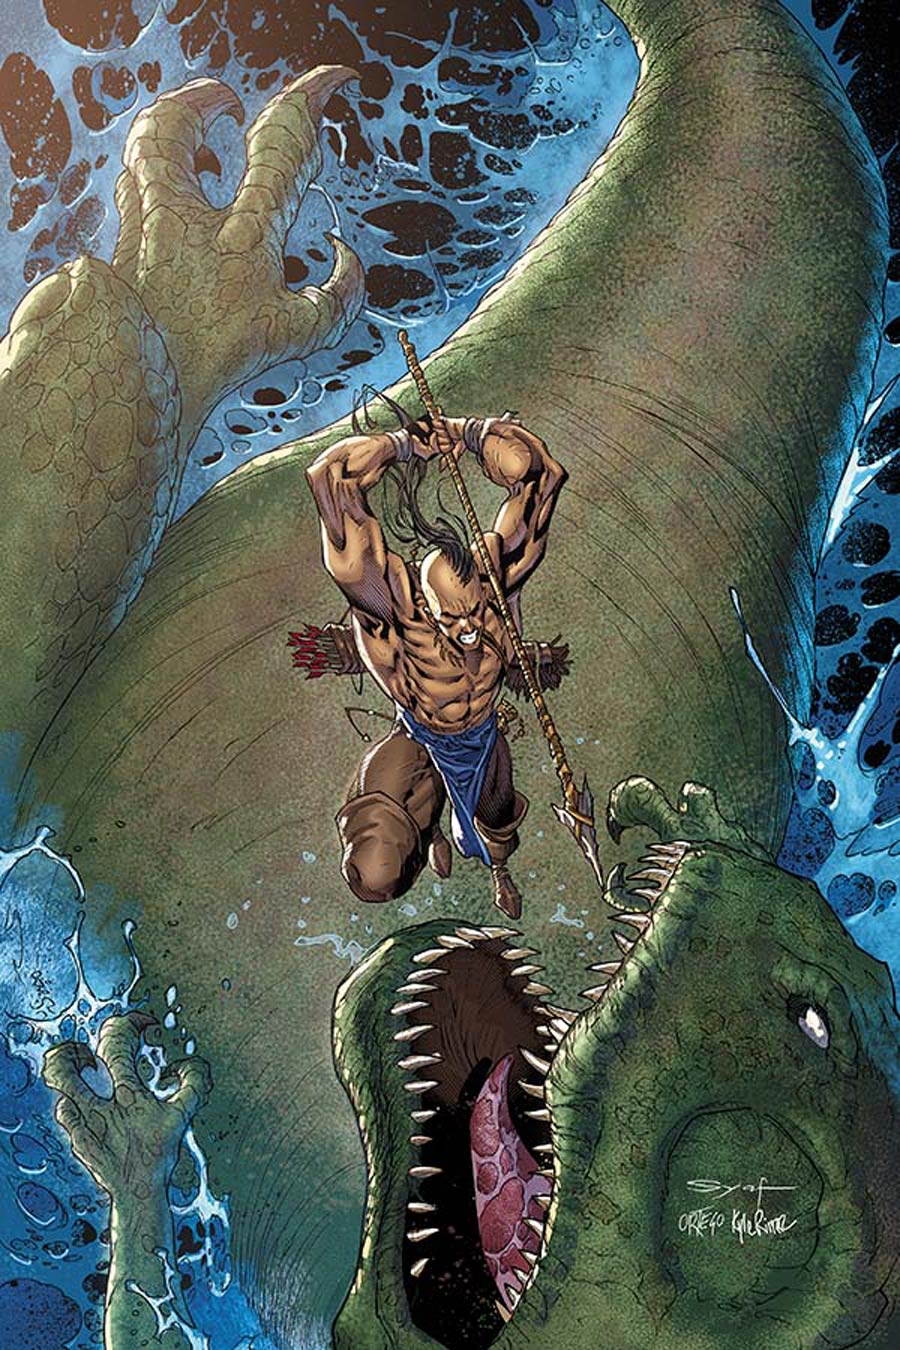 Turok Dinosaur Hunter Vol 2 #4 Cover H High-End Ardian Syaf Virgin Art Ultra-Limited Variant Cover (ONLY 25 COPIES IN EXISTENCE!)